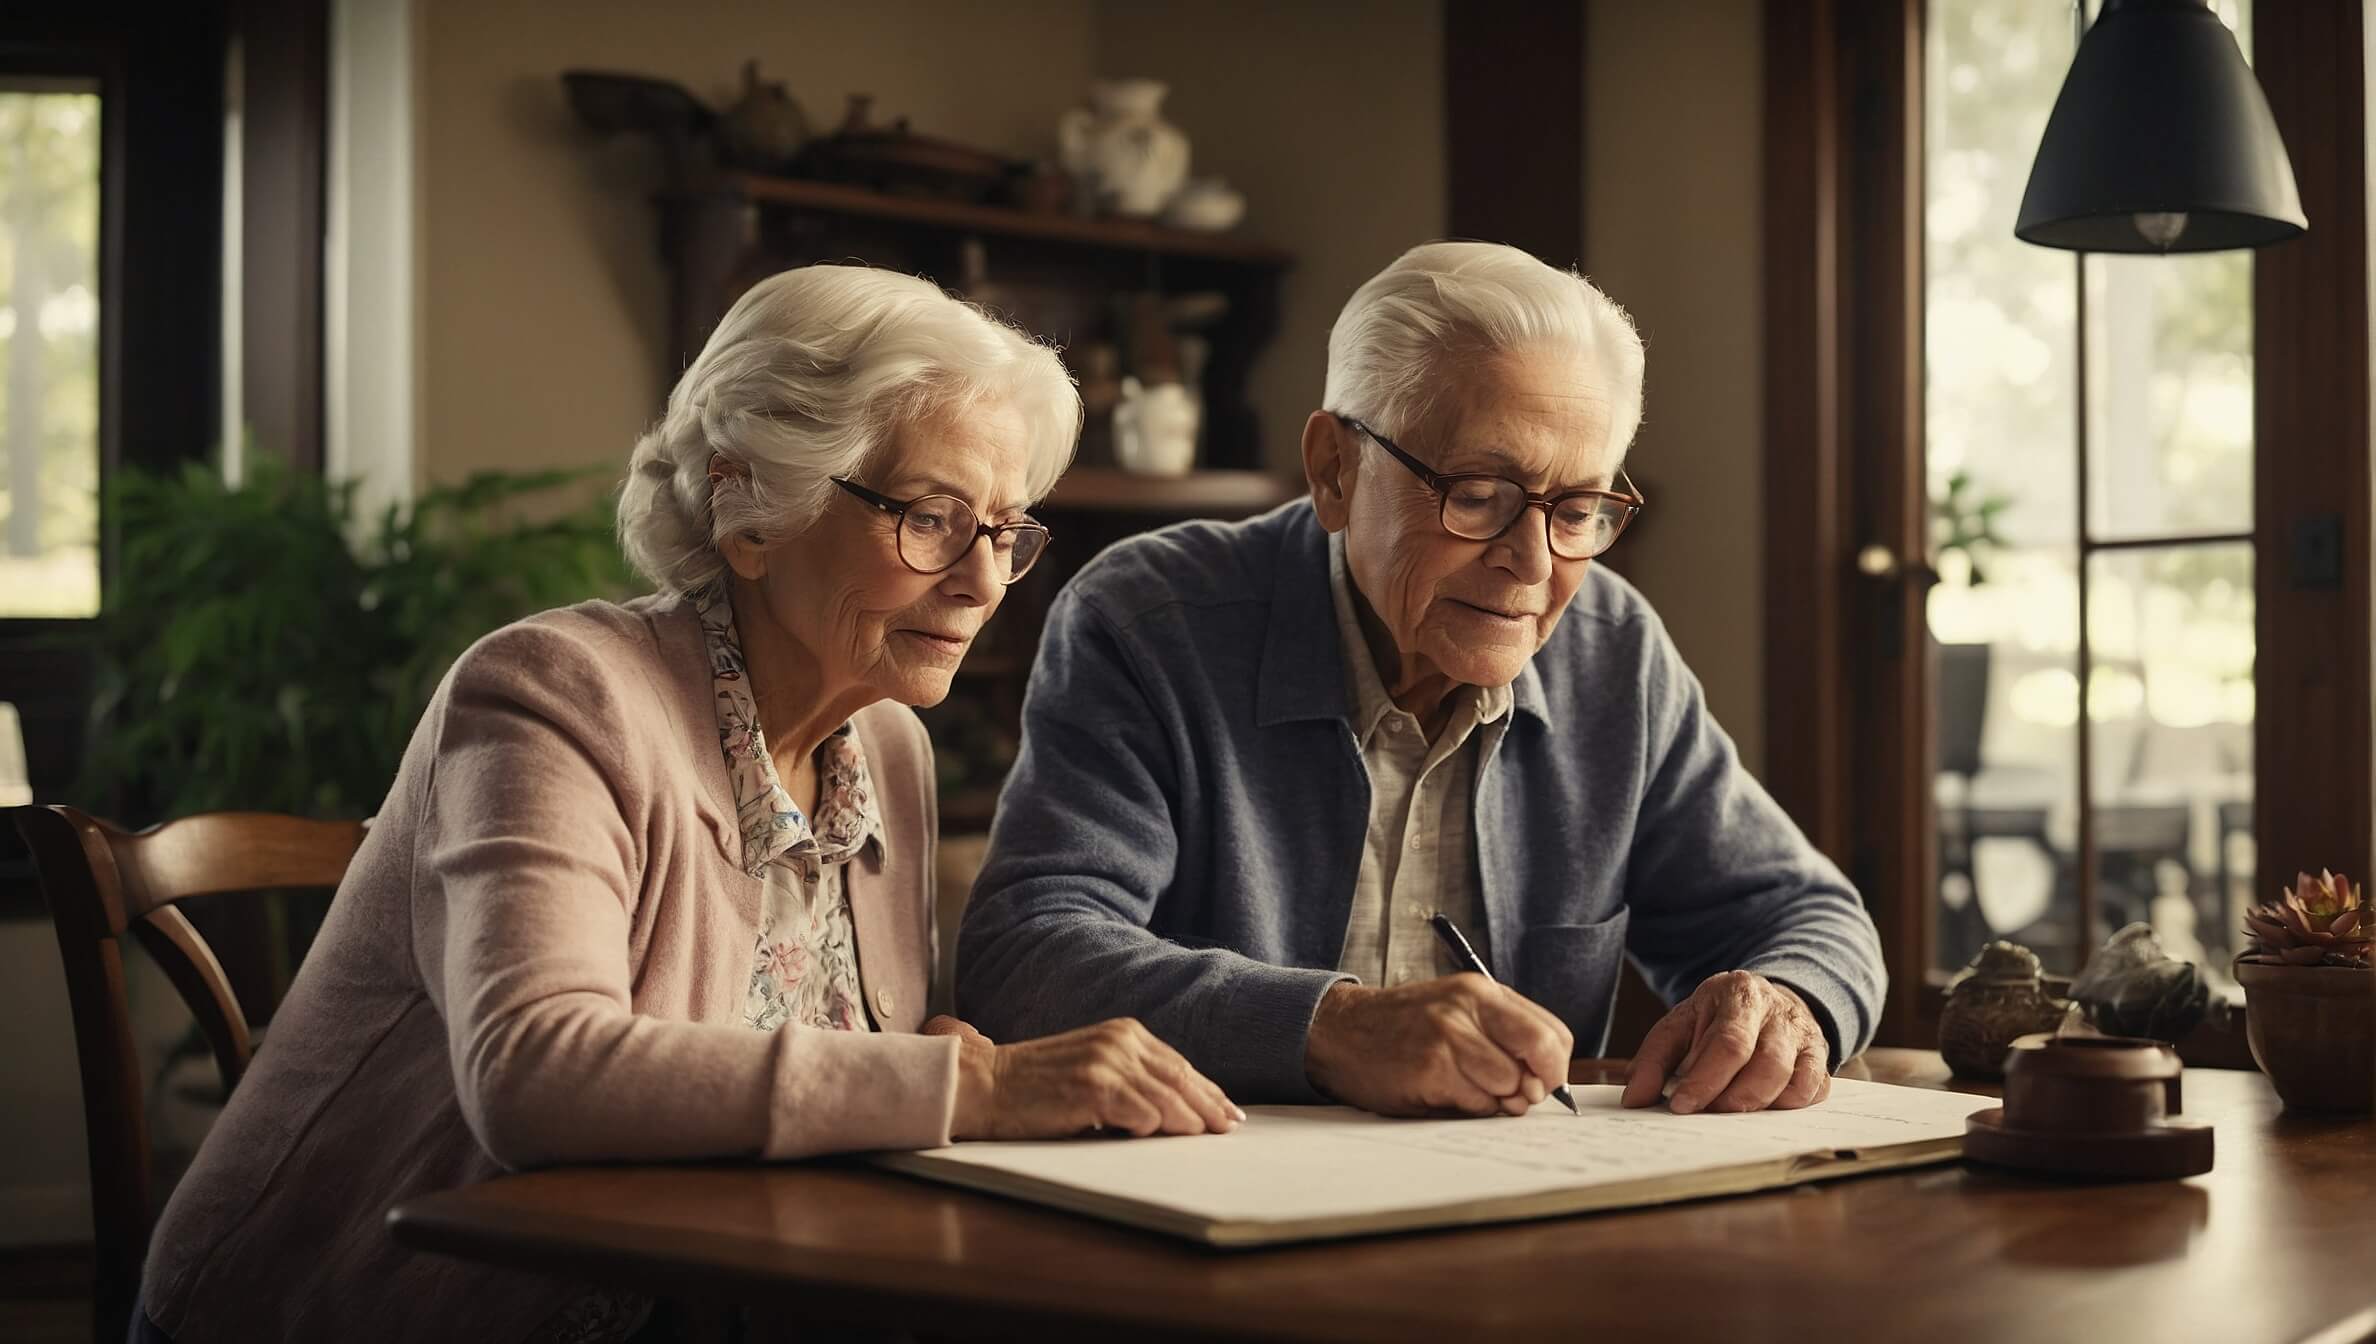 Elderly couple smiling at kitchen table, ready to enjoy retirement while their children prioritize their well-being over their home.